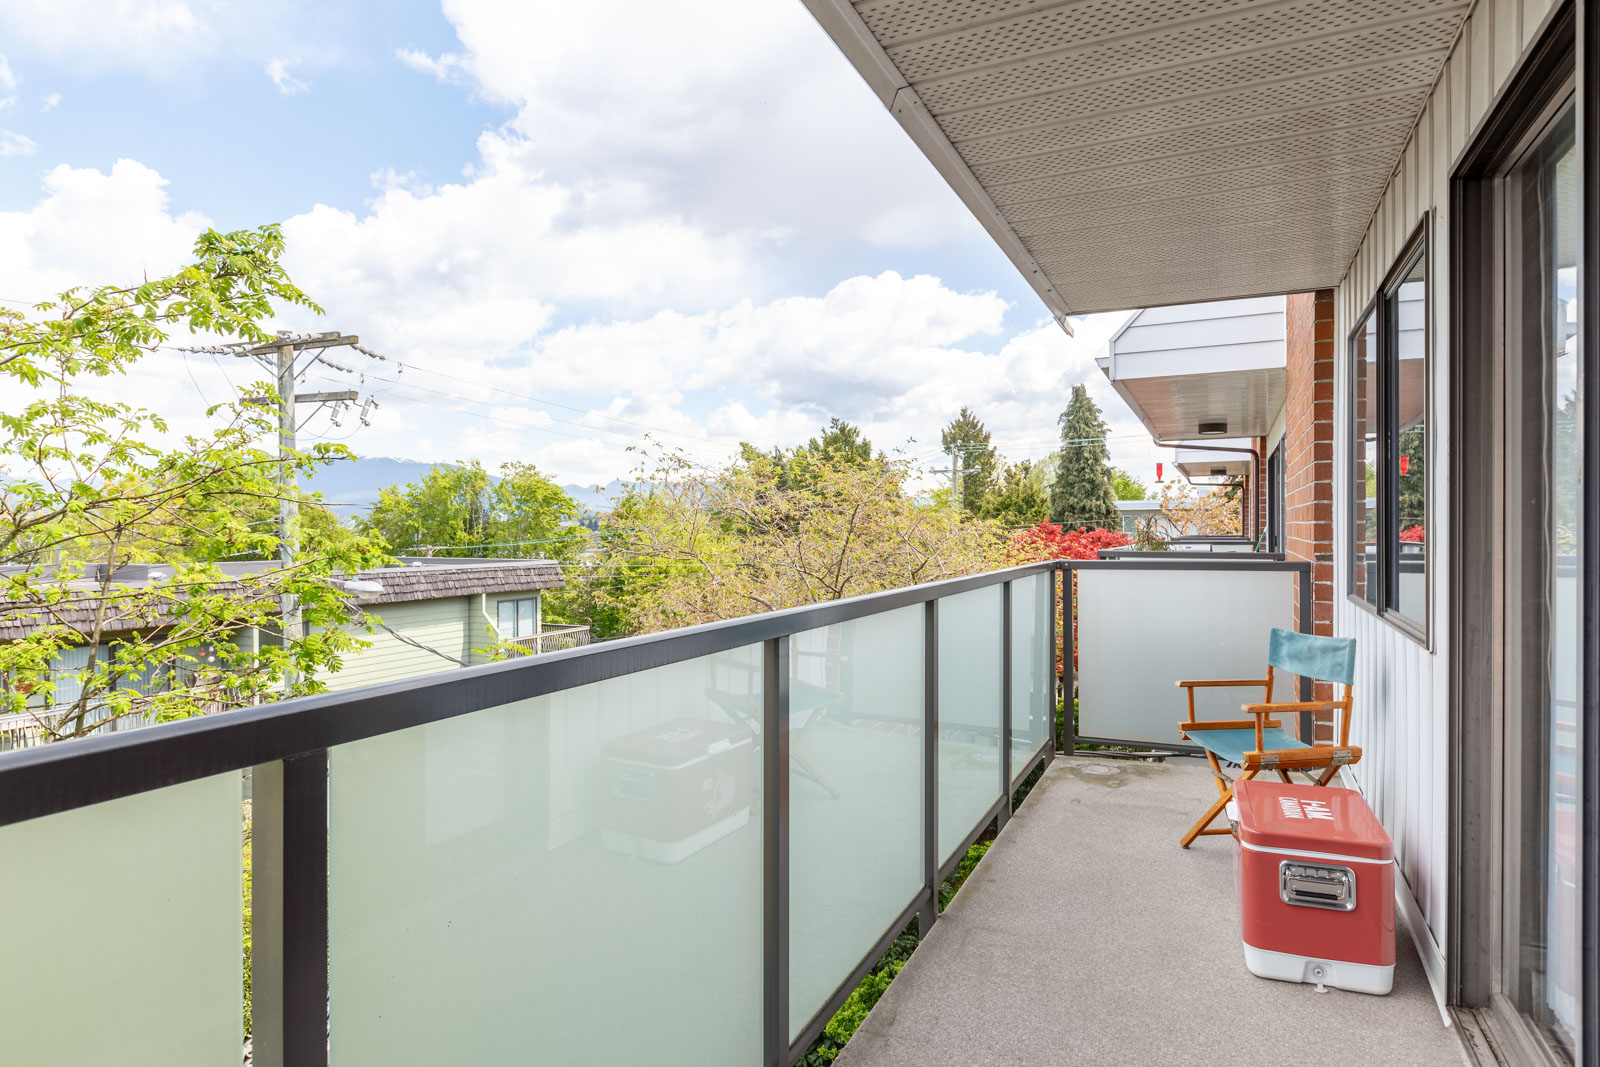 Private balcony of Vancouver rental condo with view.